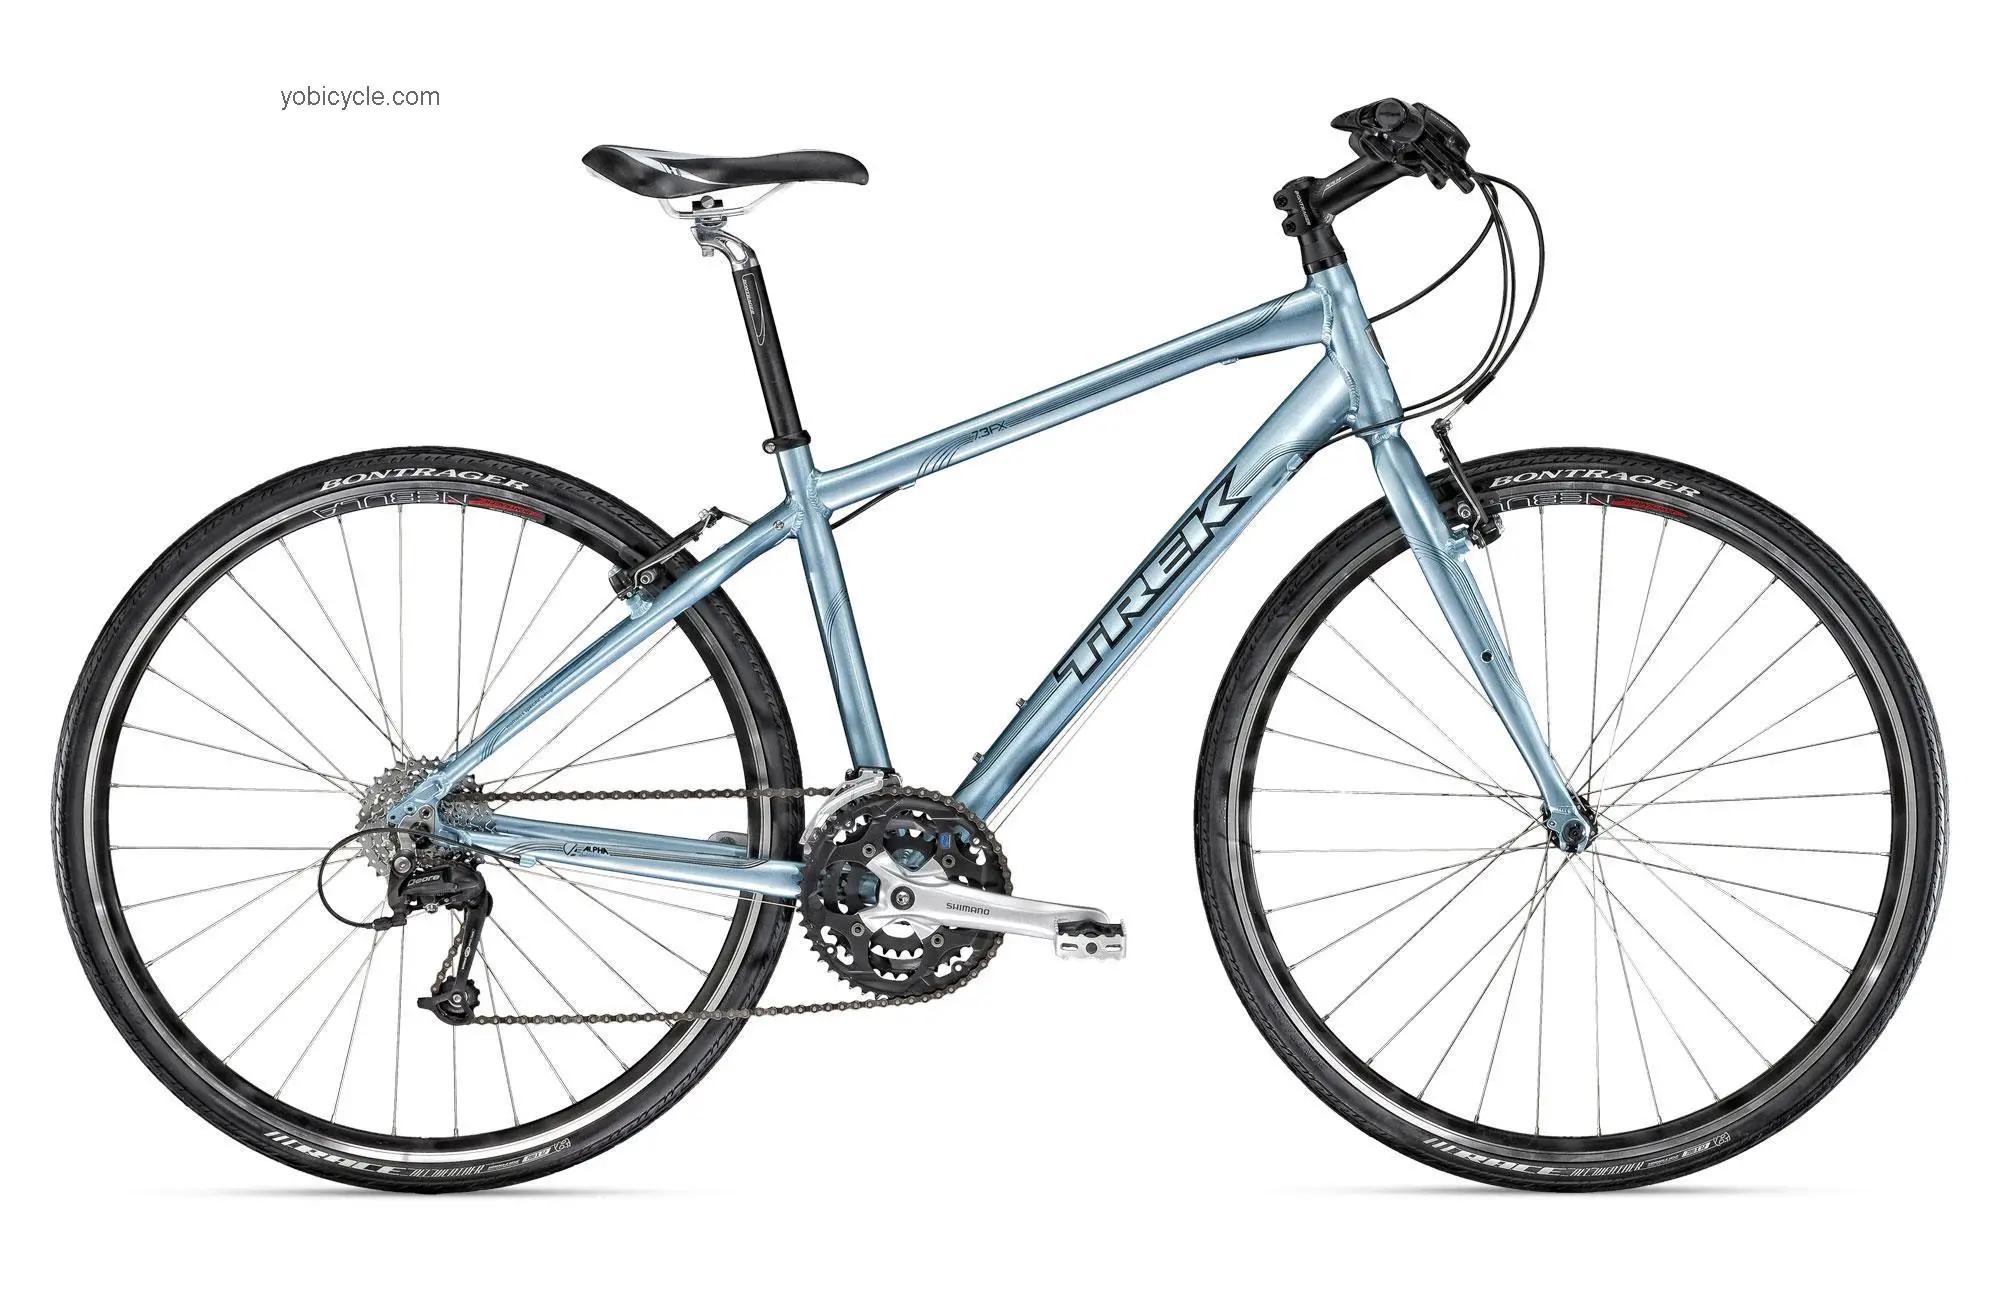 Trek 7.3 FX WSD Stagger 2011 comparison online with competitors